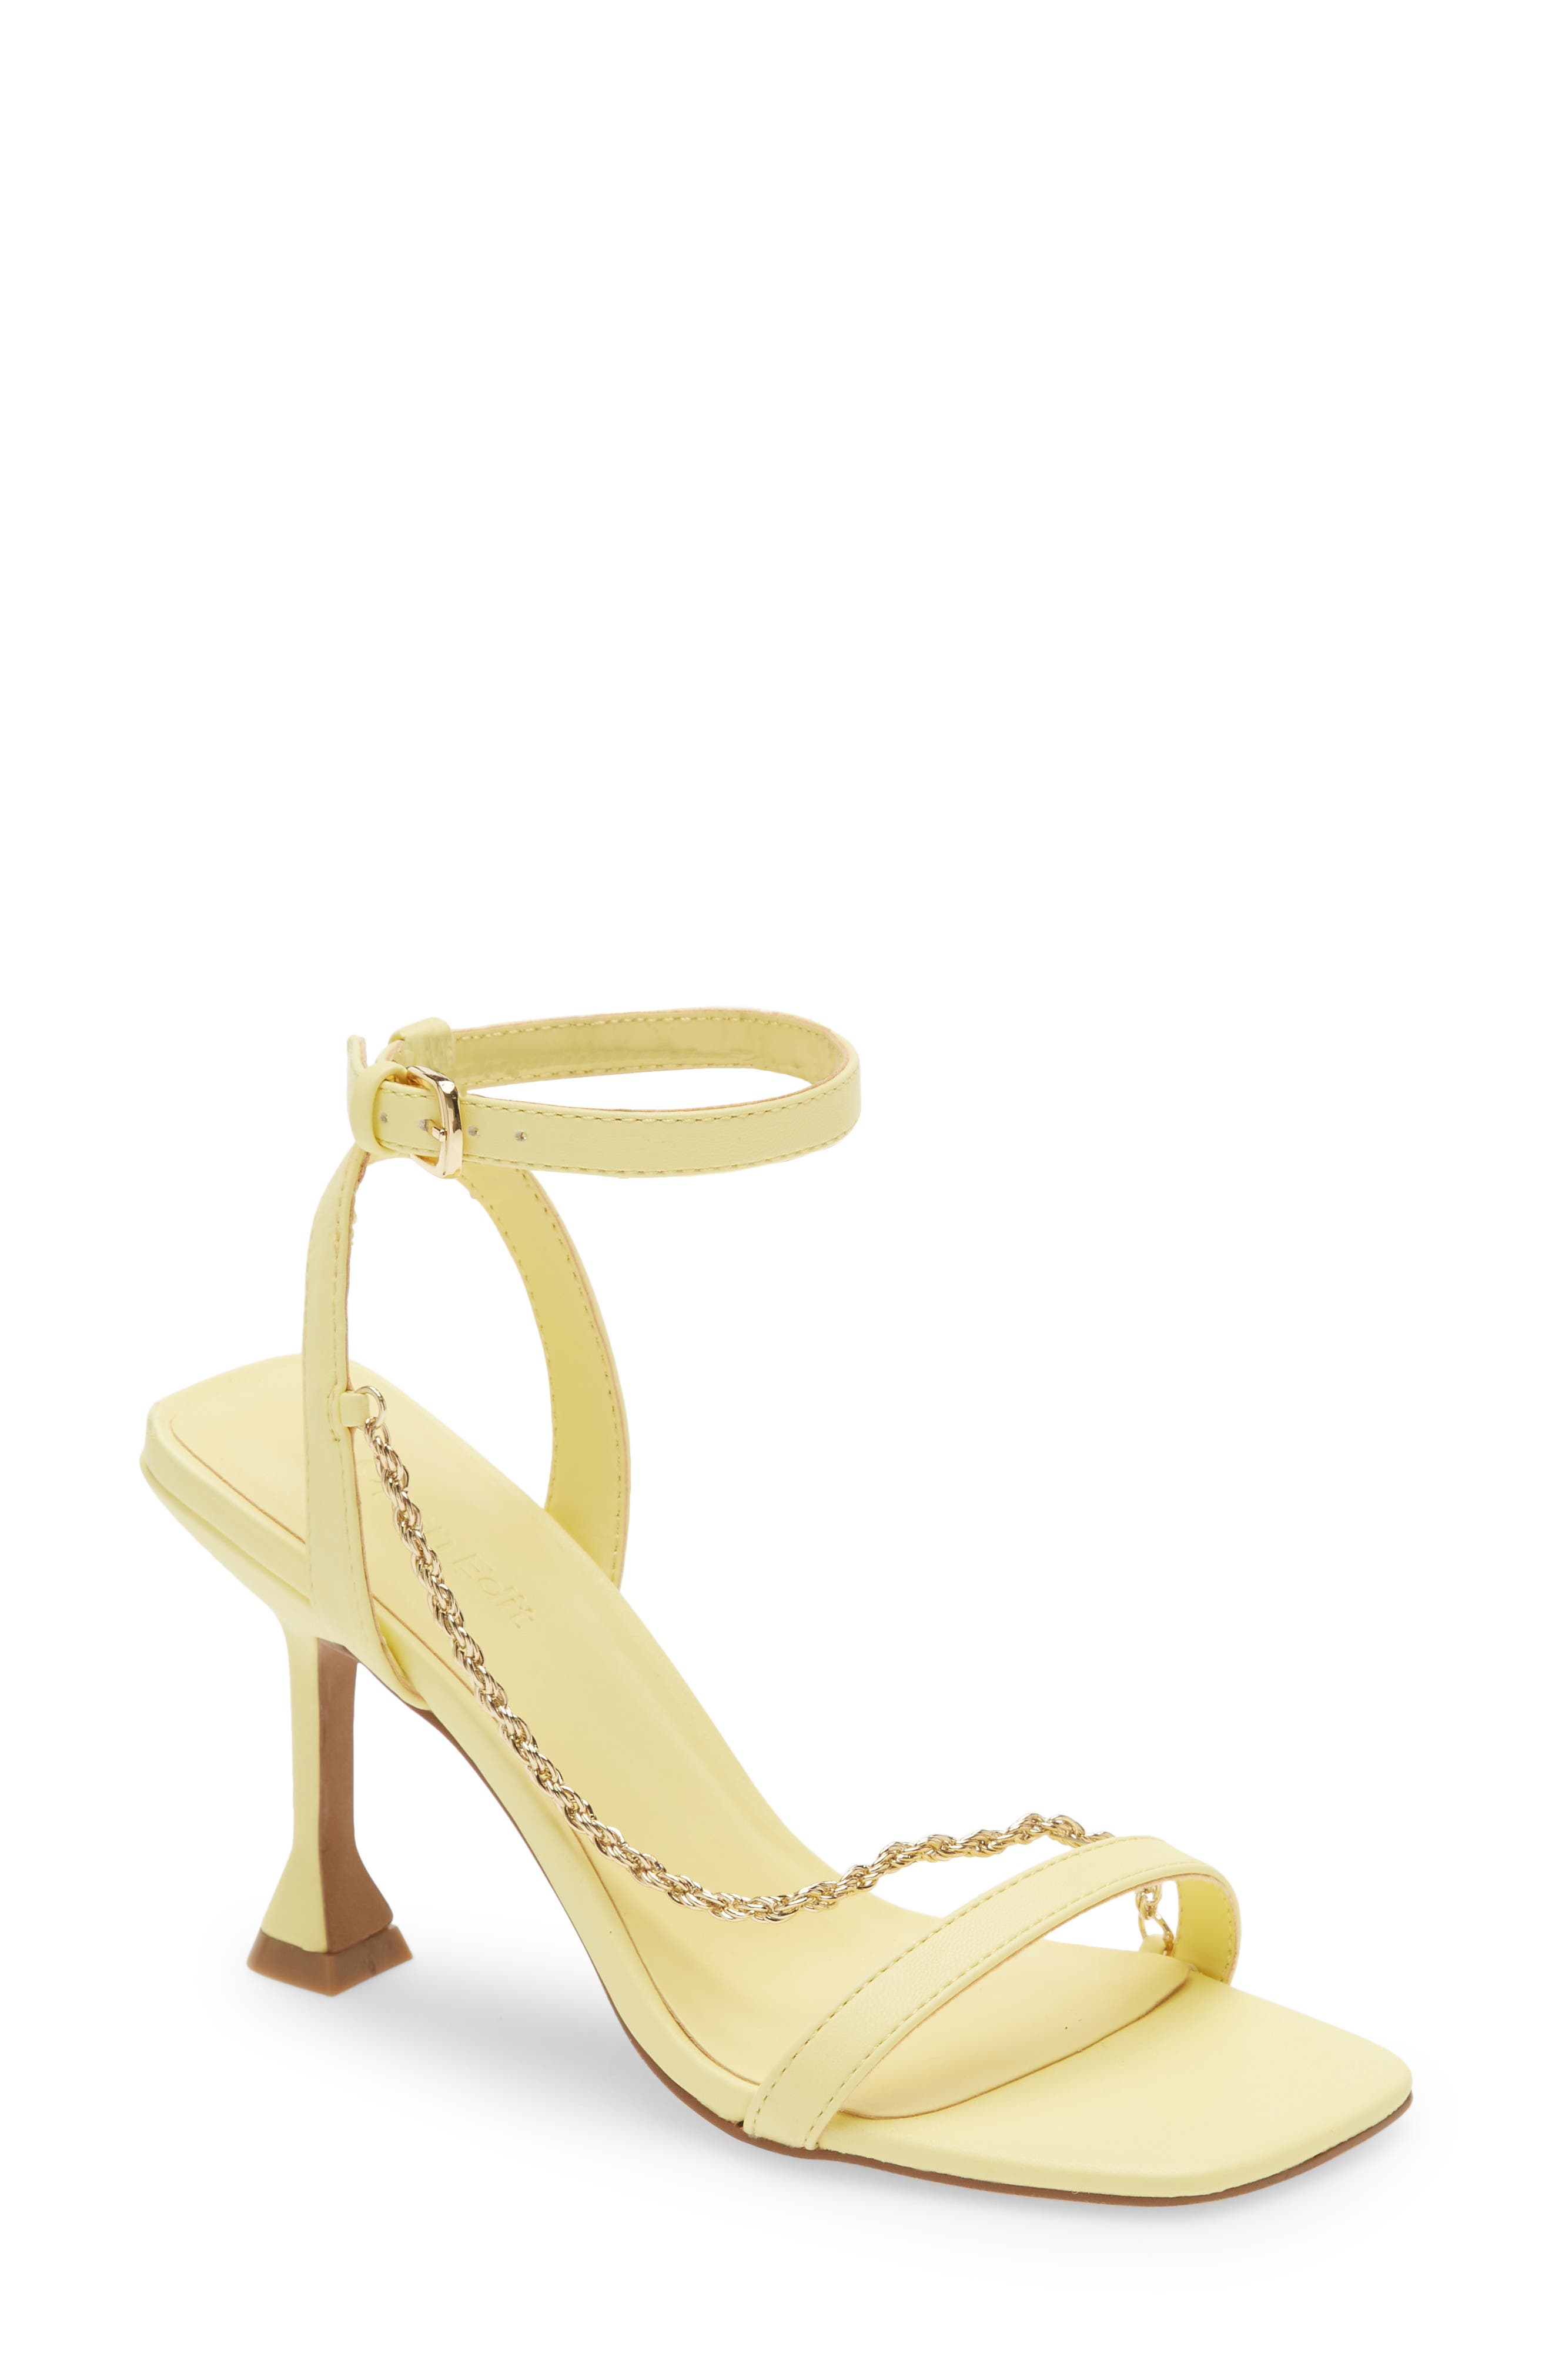 pale yellow shoes womens